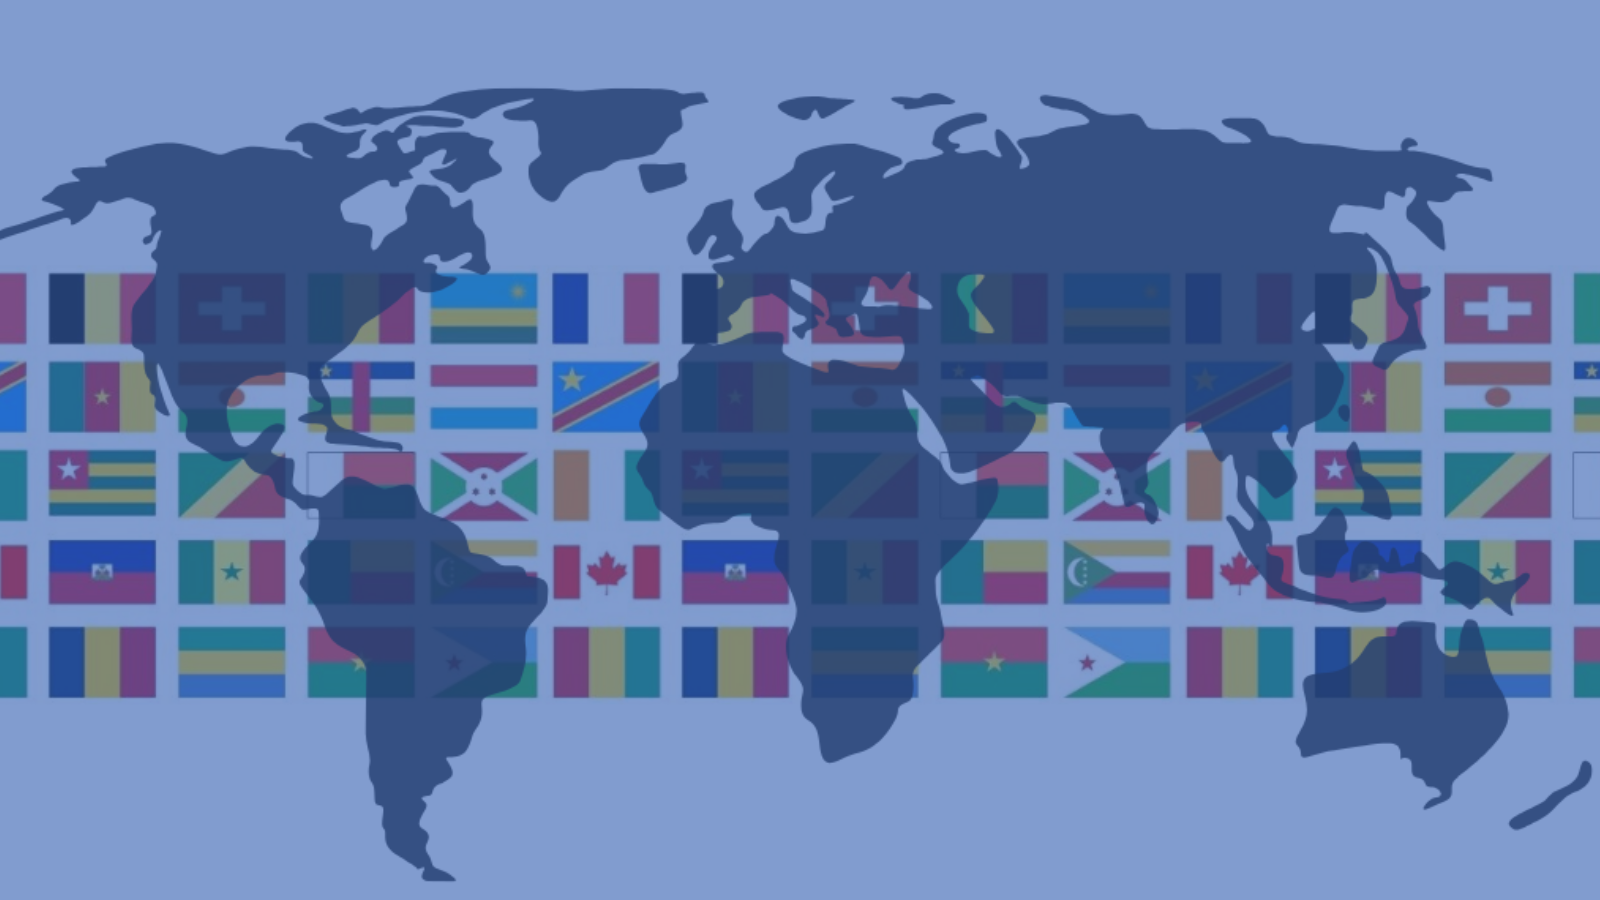 sllc french banner image of map of the world with all french speaking country flags